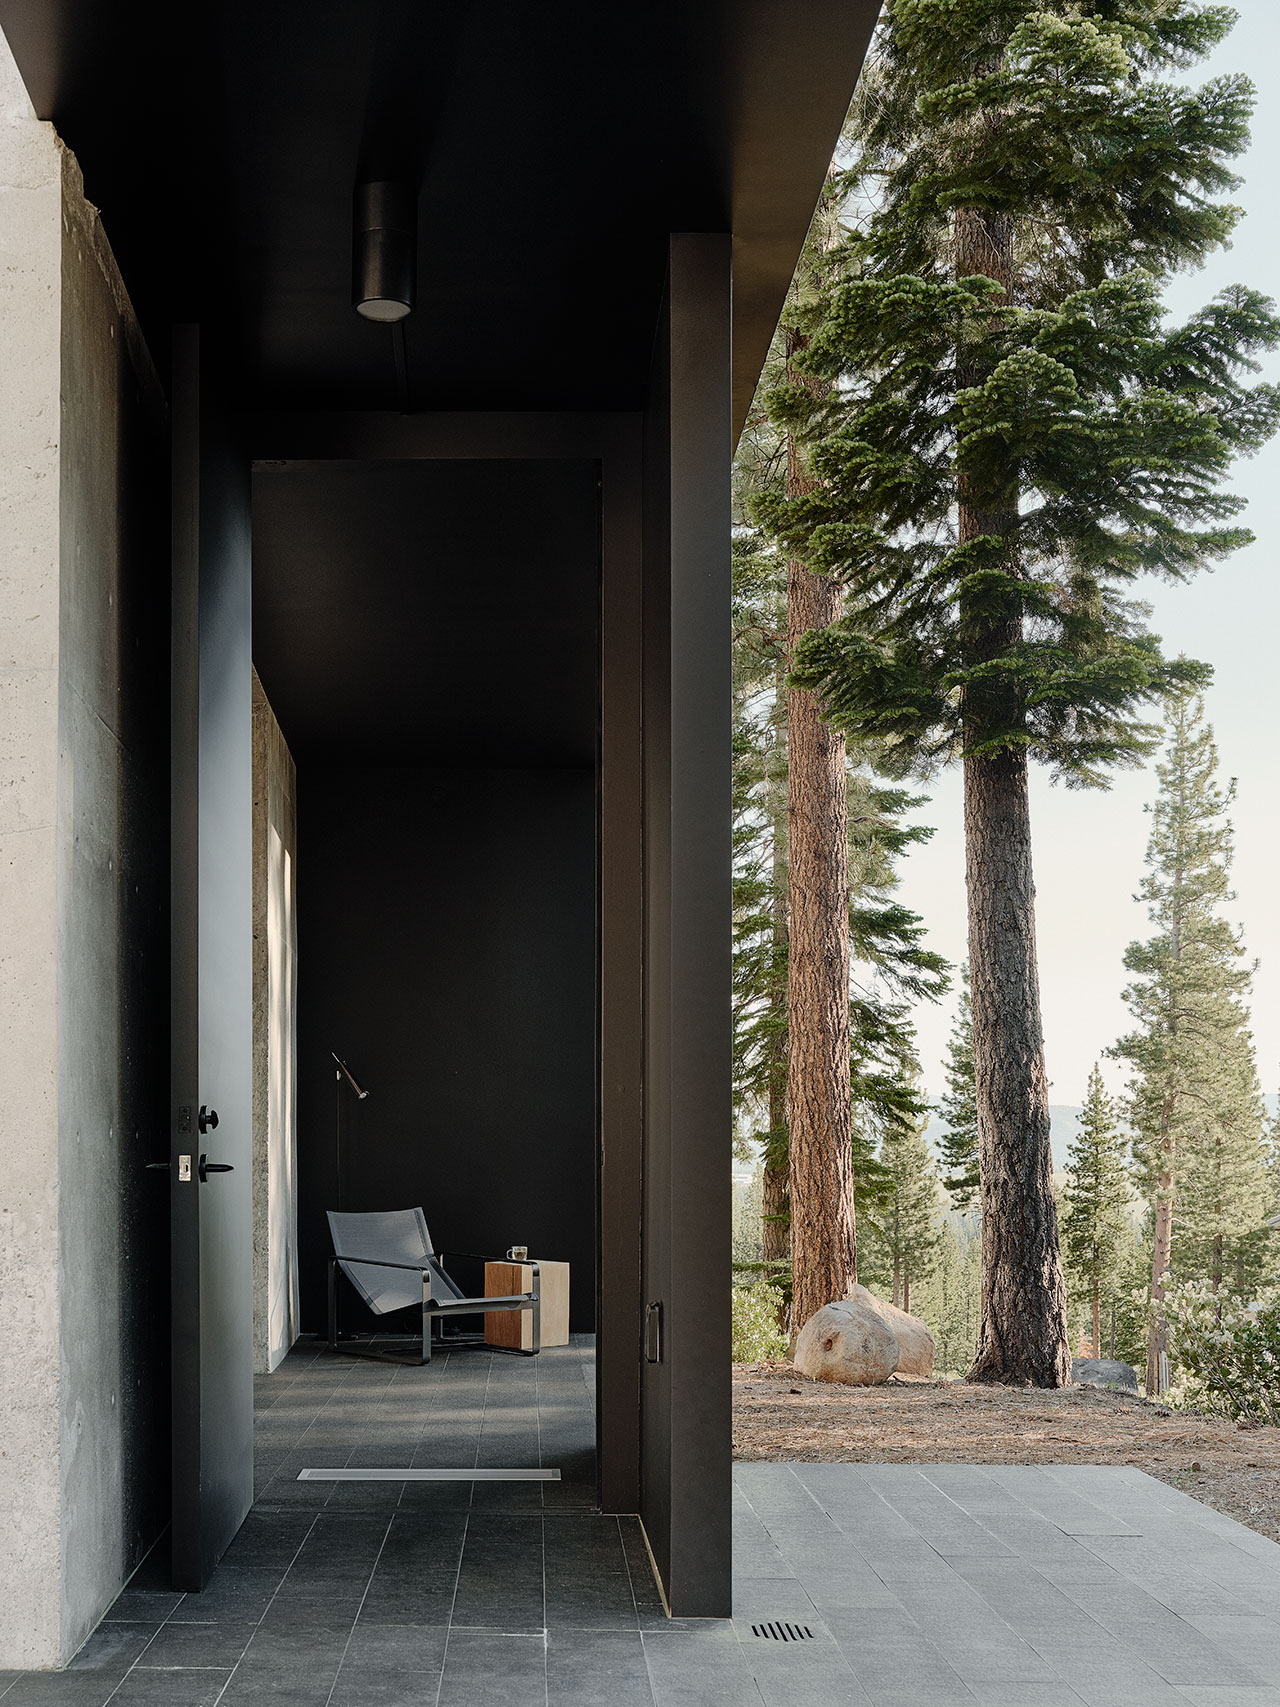 Lookout House by Faulkner Architects.
Photography by Joe Fletcher Photography.